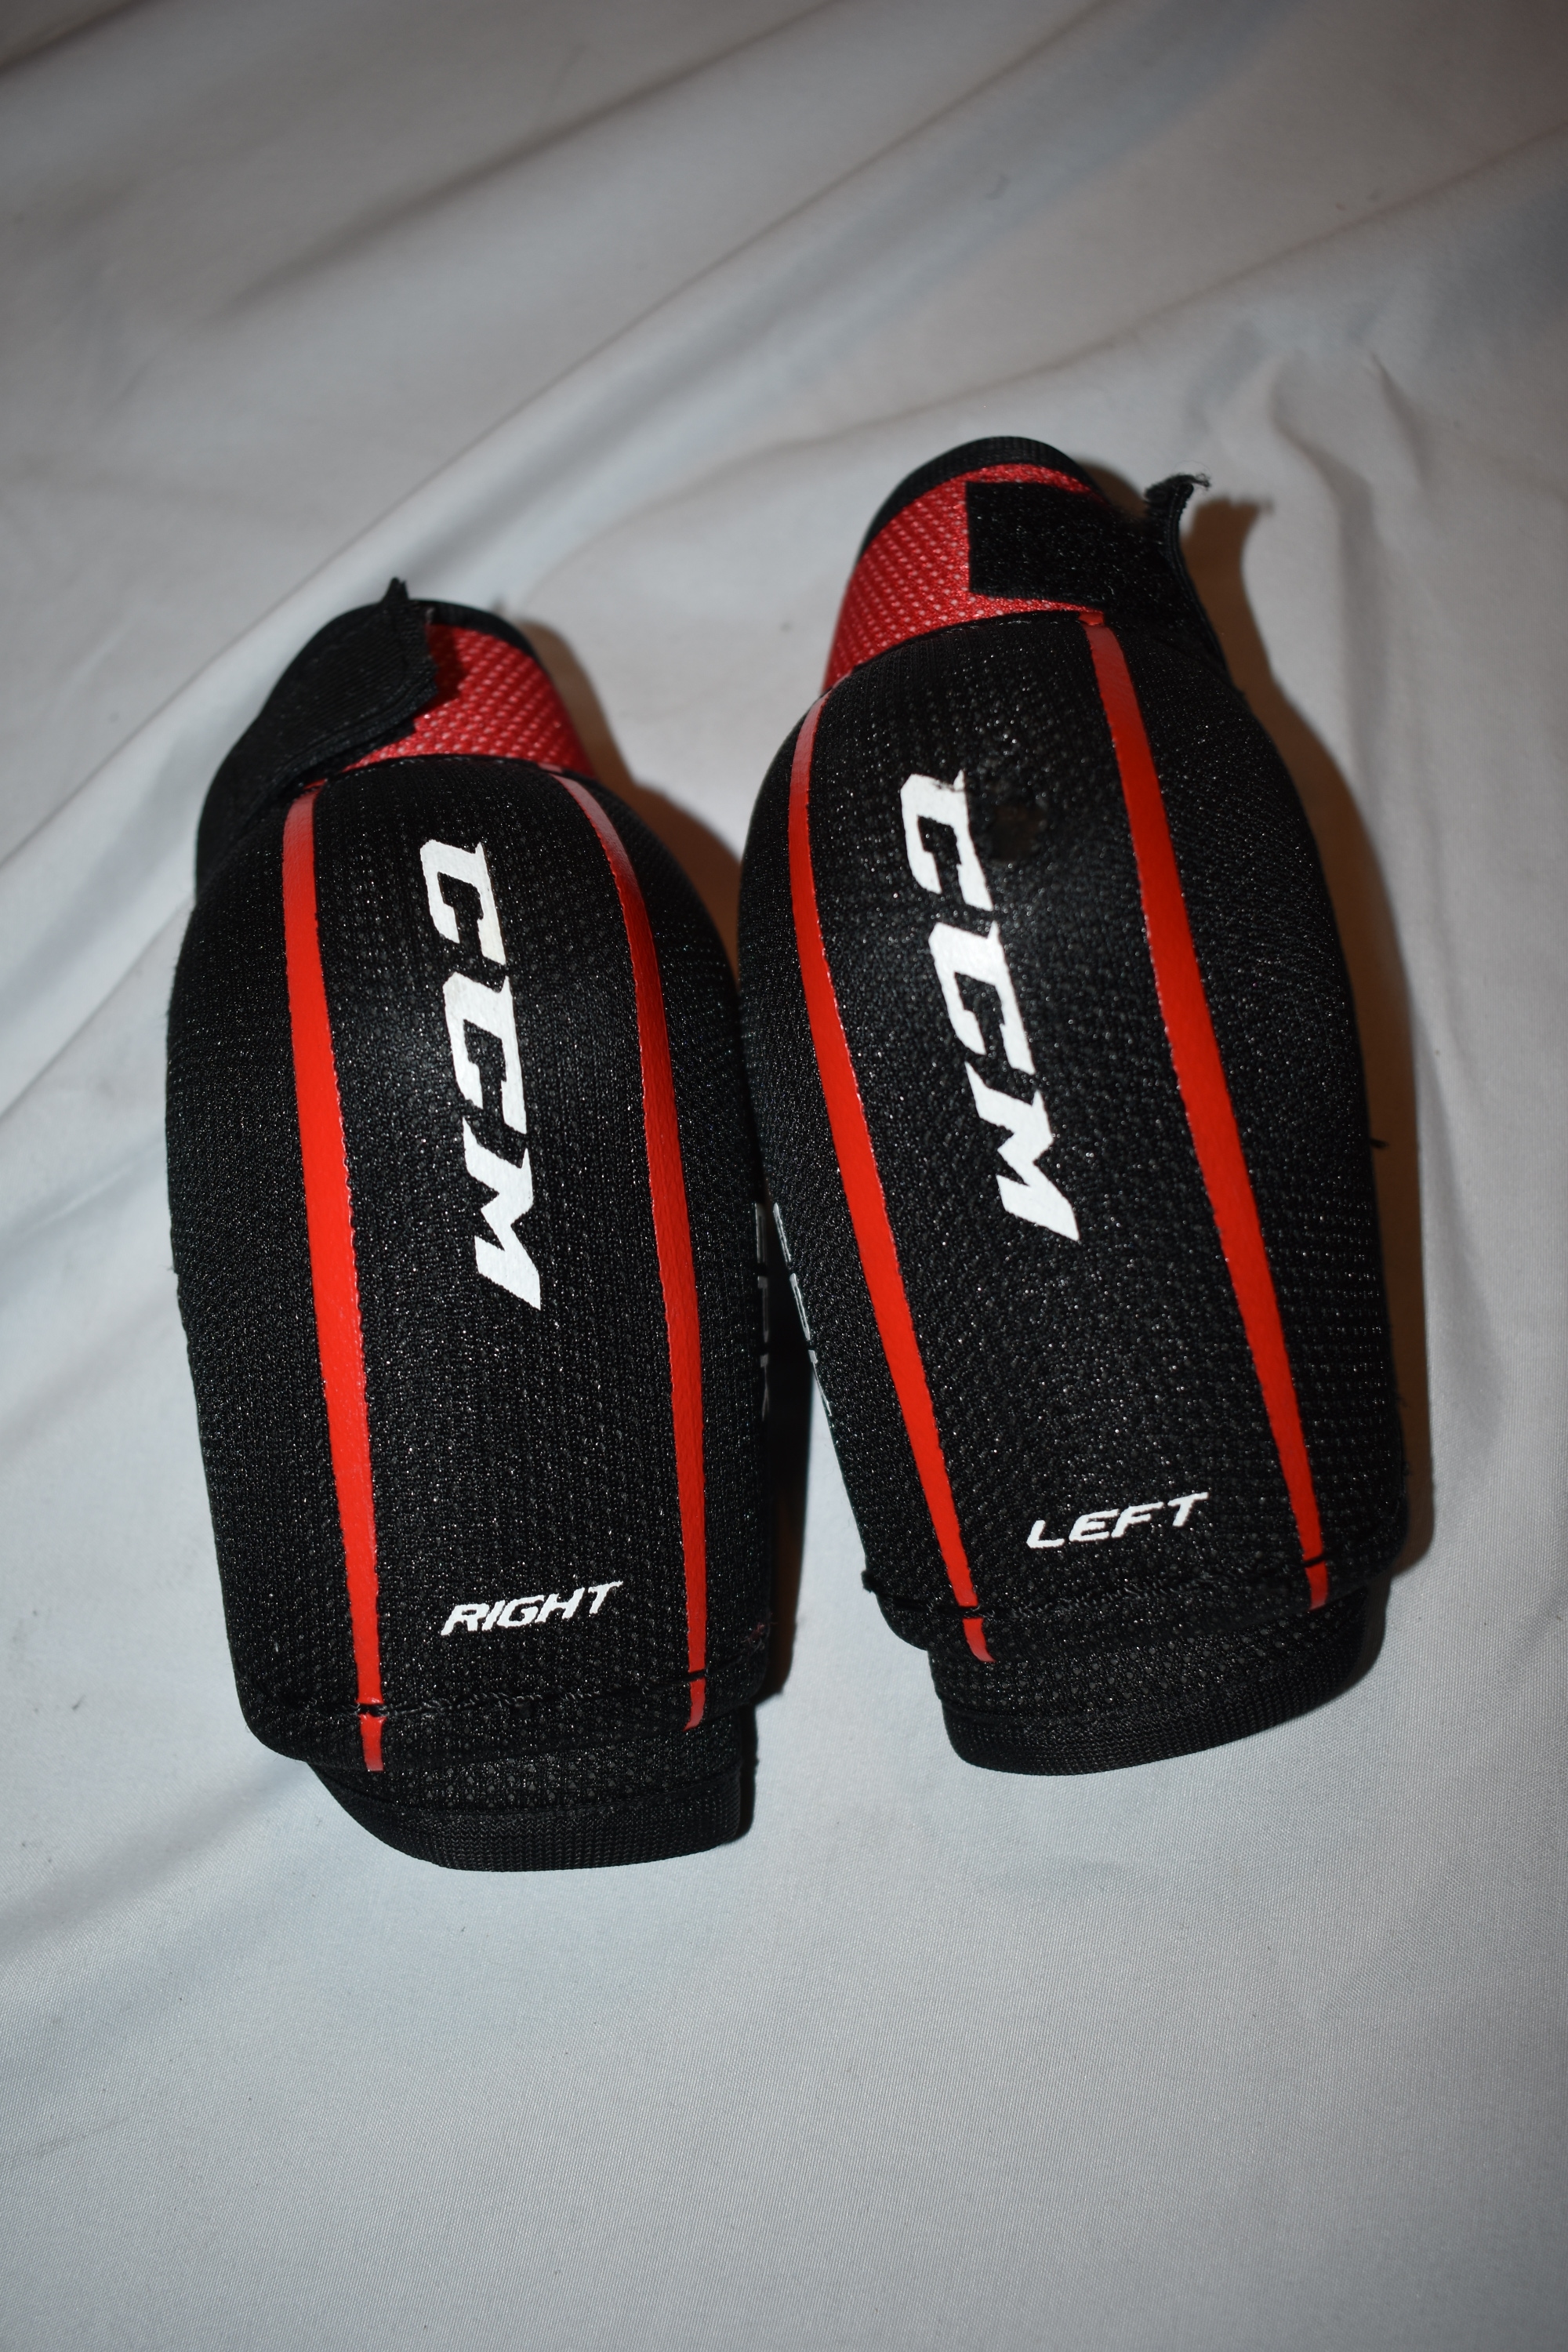 CCM EPK Hockey Elbow Pads, Black/Red, Youth Large  - Great Condition!